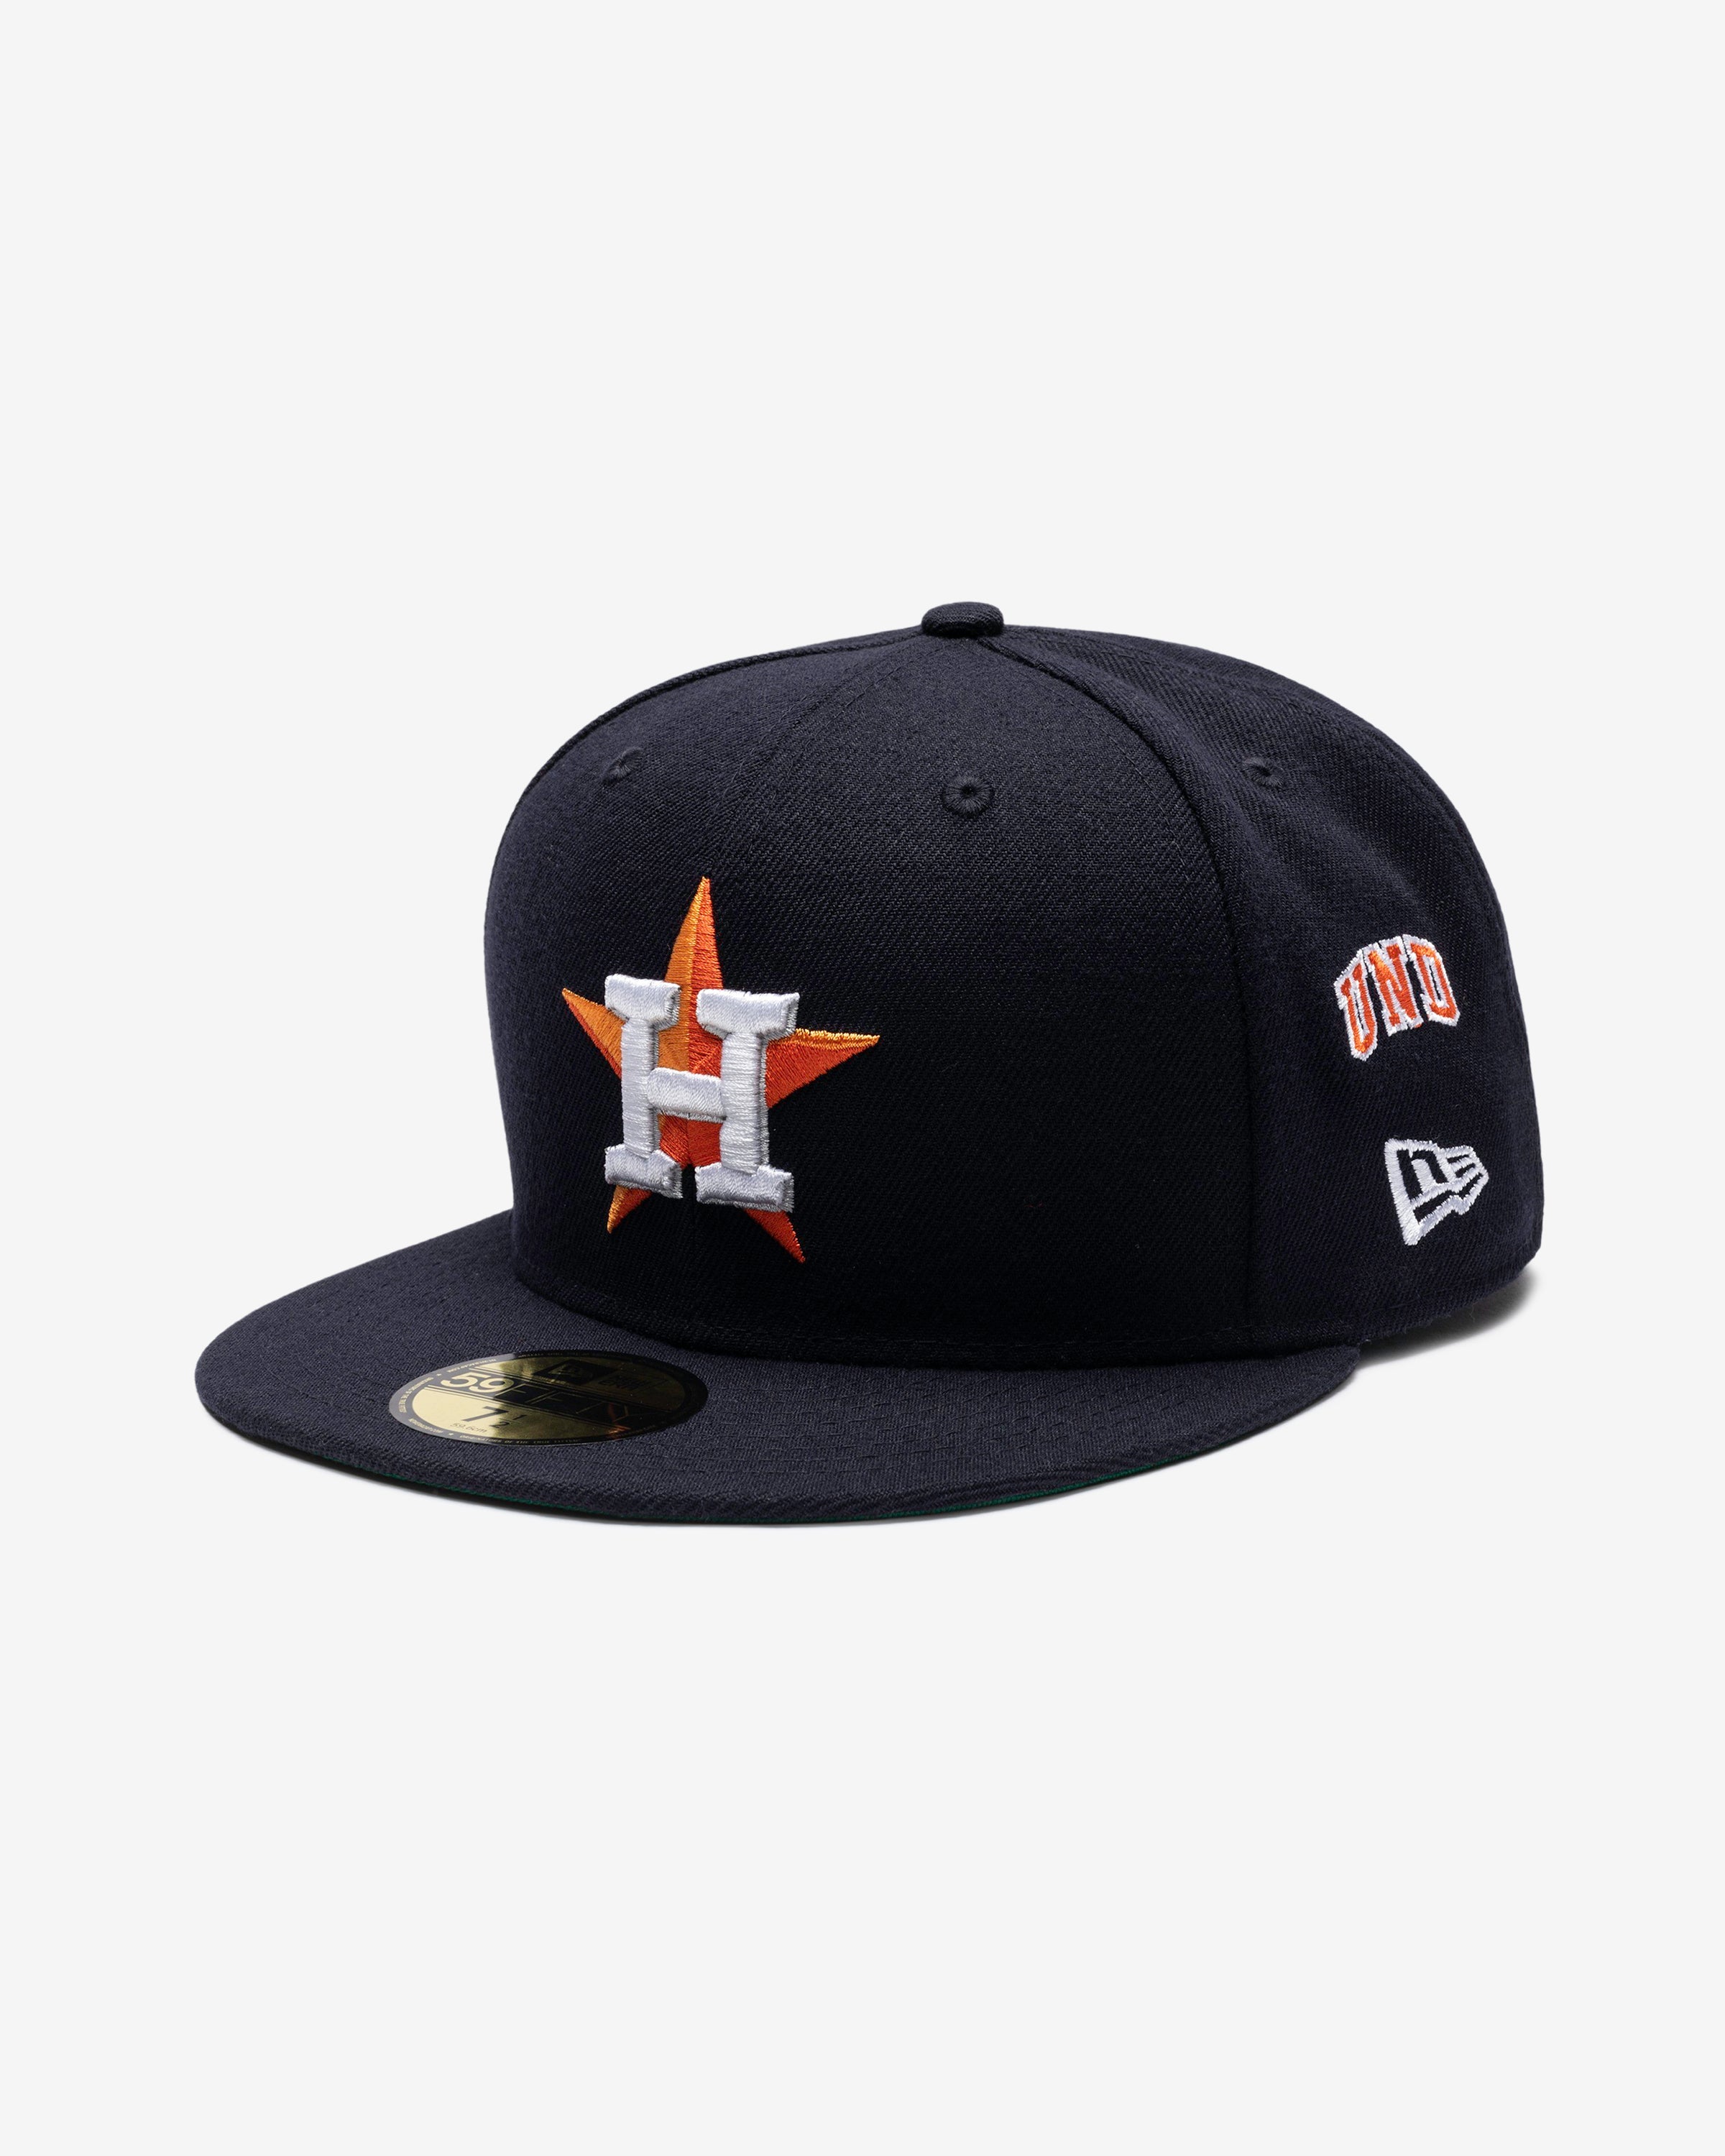 Houston Astros on X: Tip of the cap from @josealtuve27 to Craig